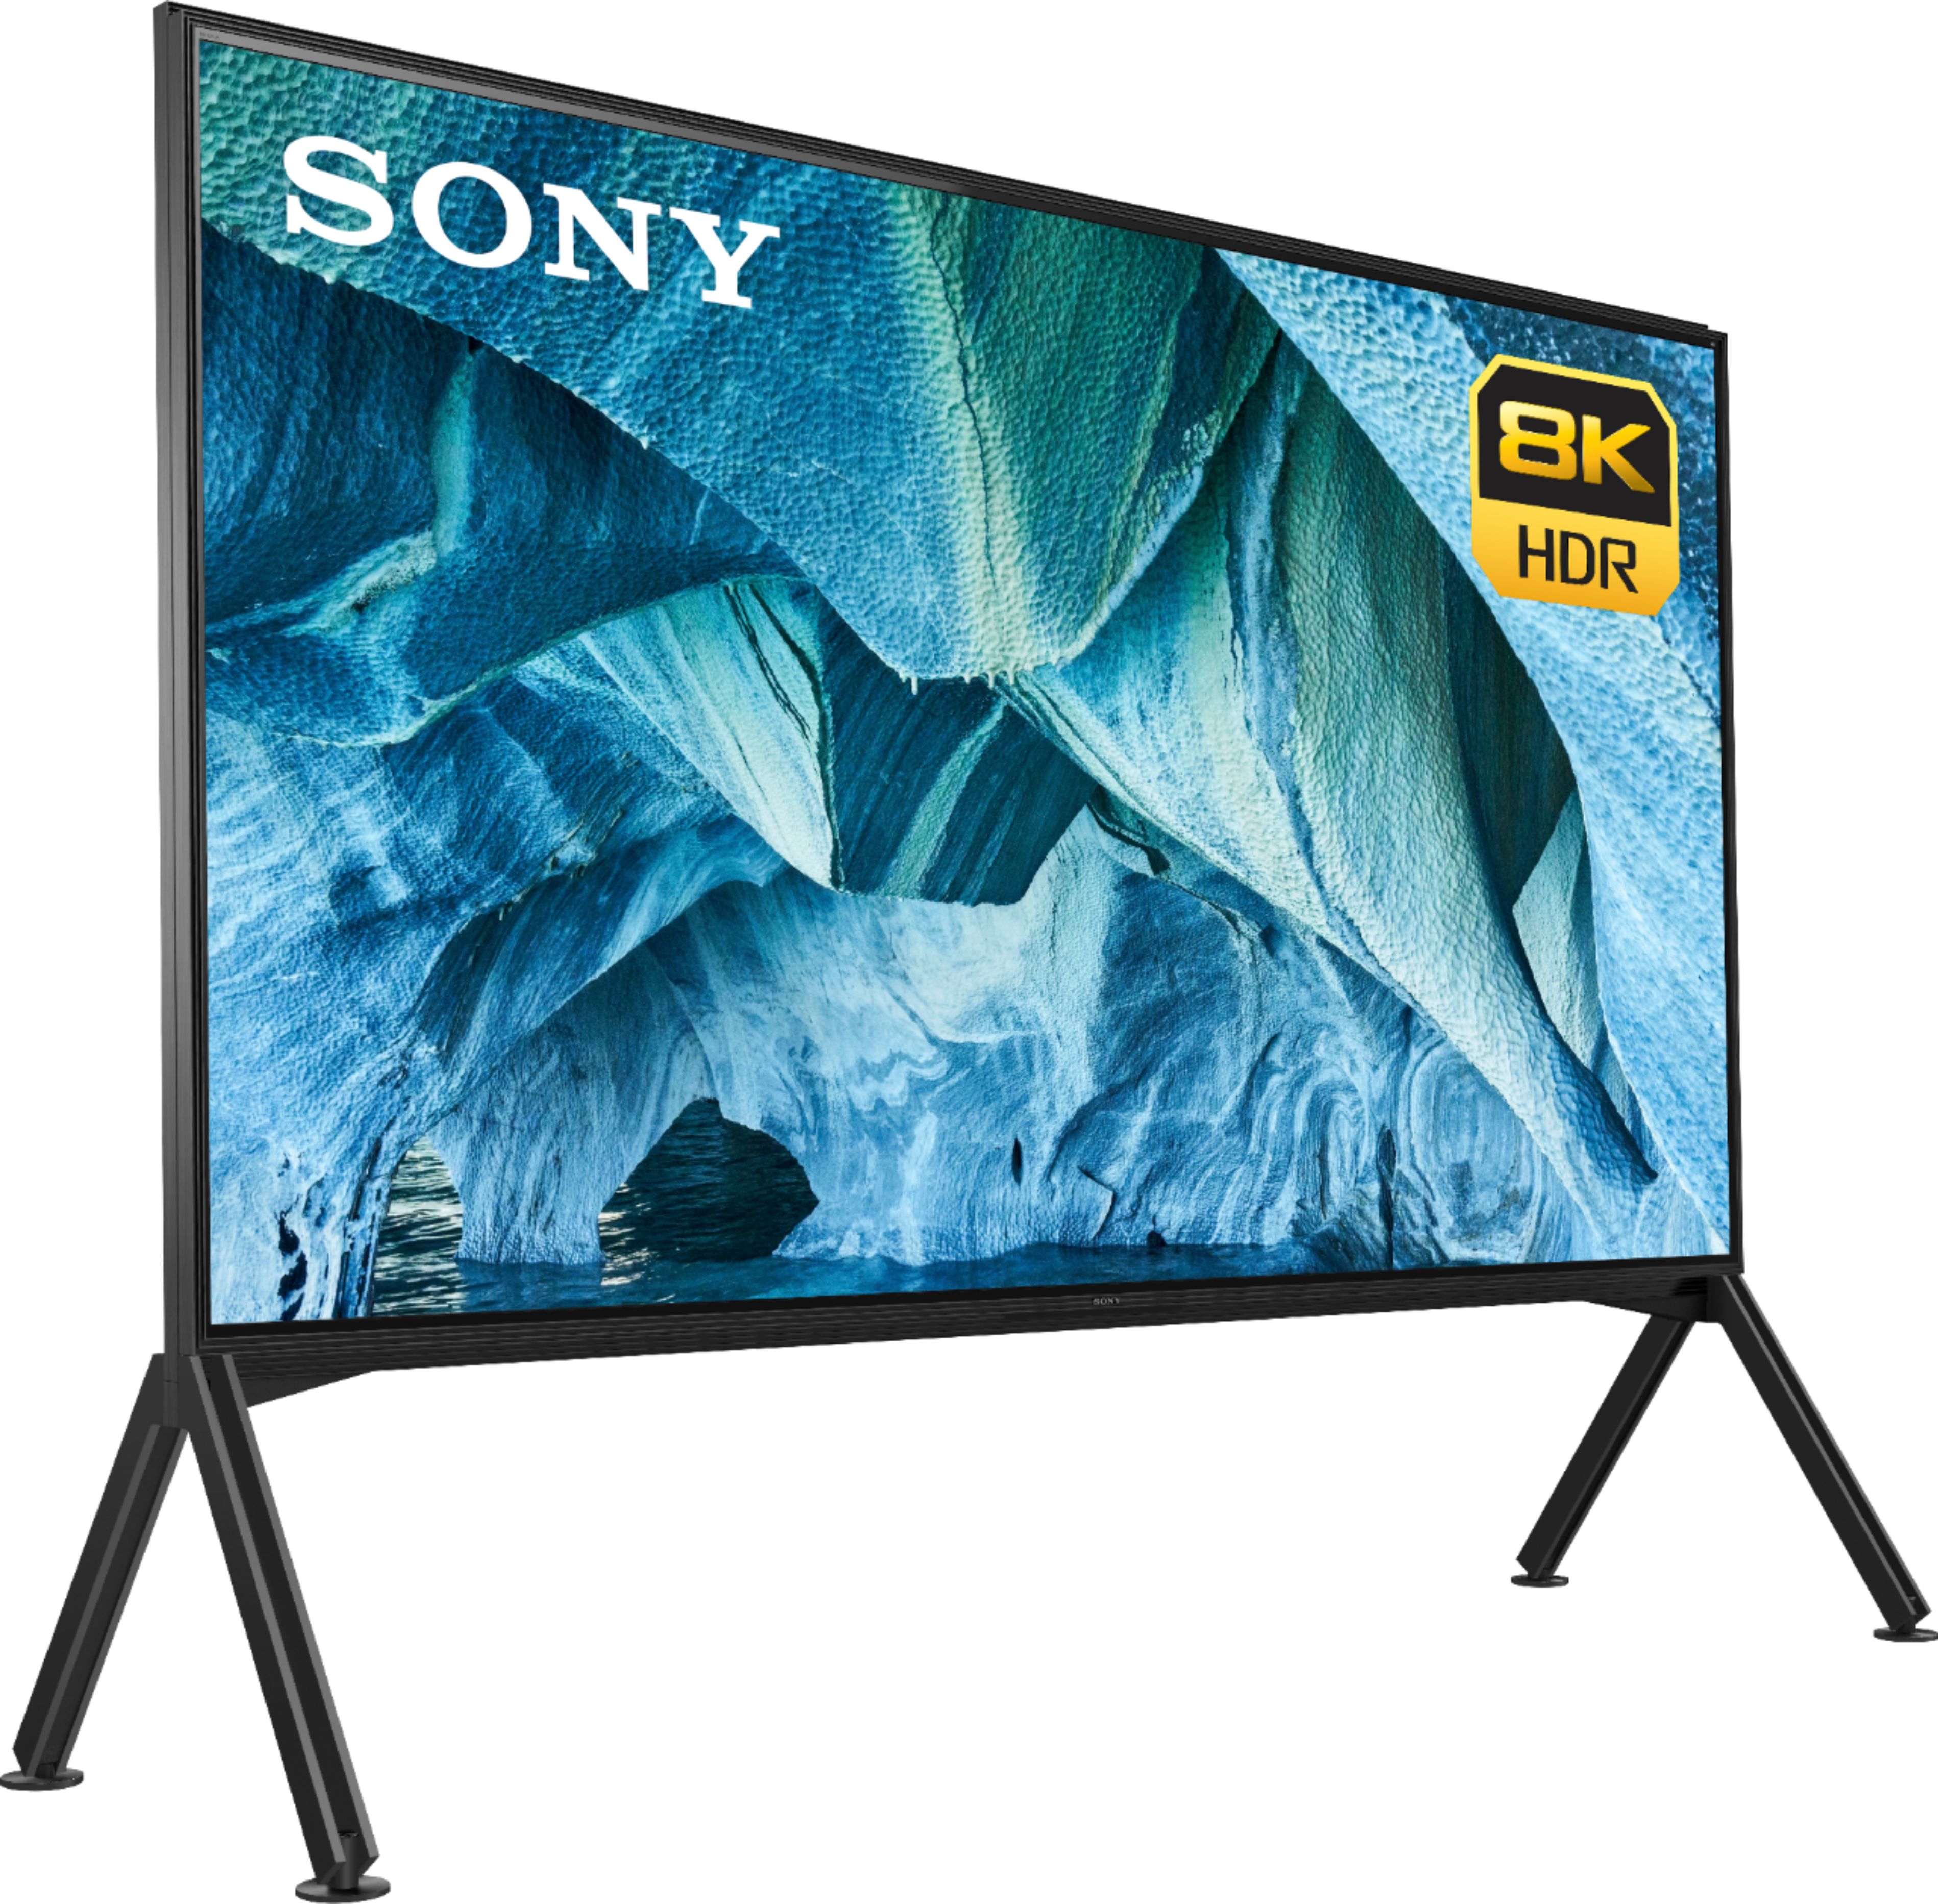 Angle View: Sony - 98" Class Z9G MASTER Series LED 8K UHD Smart Android TV